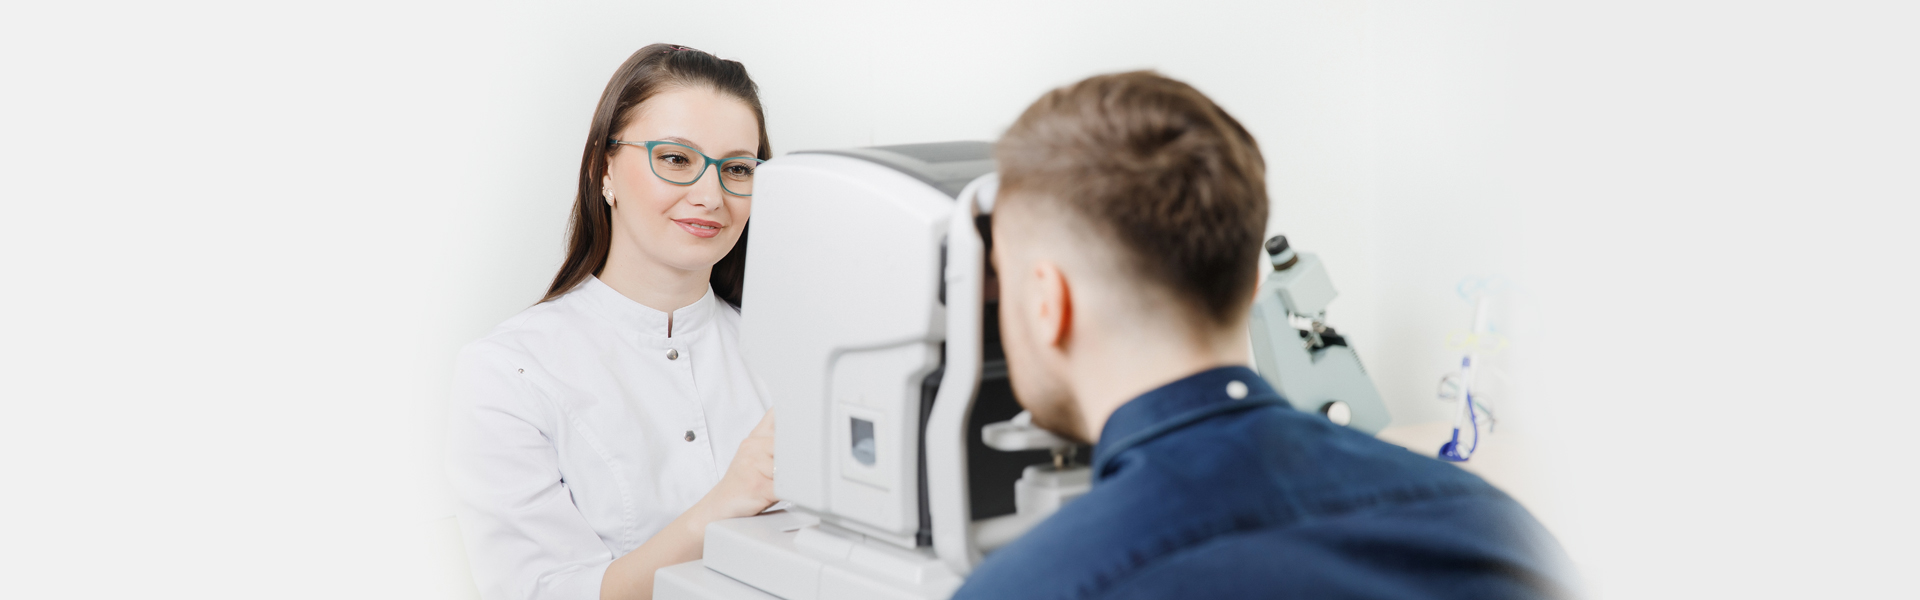 5 Commonly Asked Questions About Lasik Eye Surgery